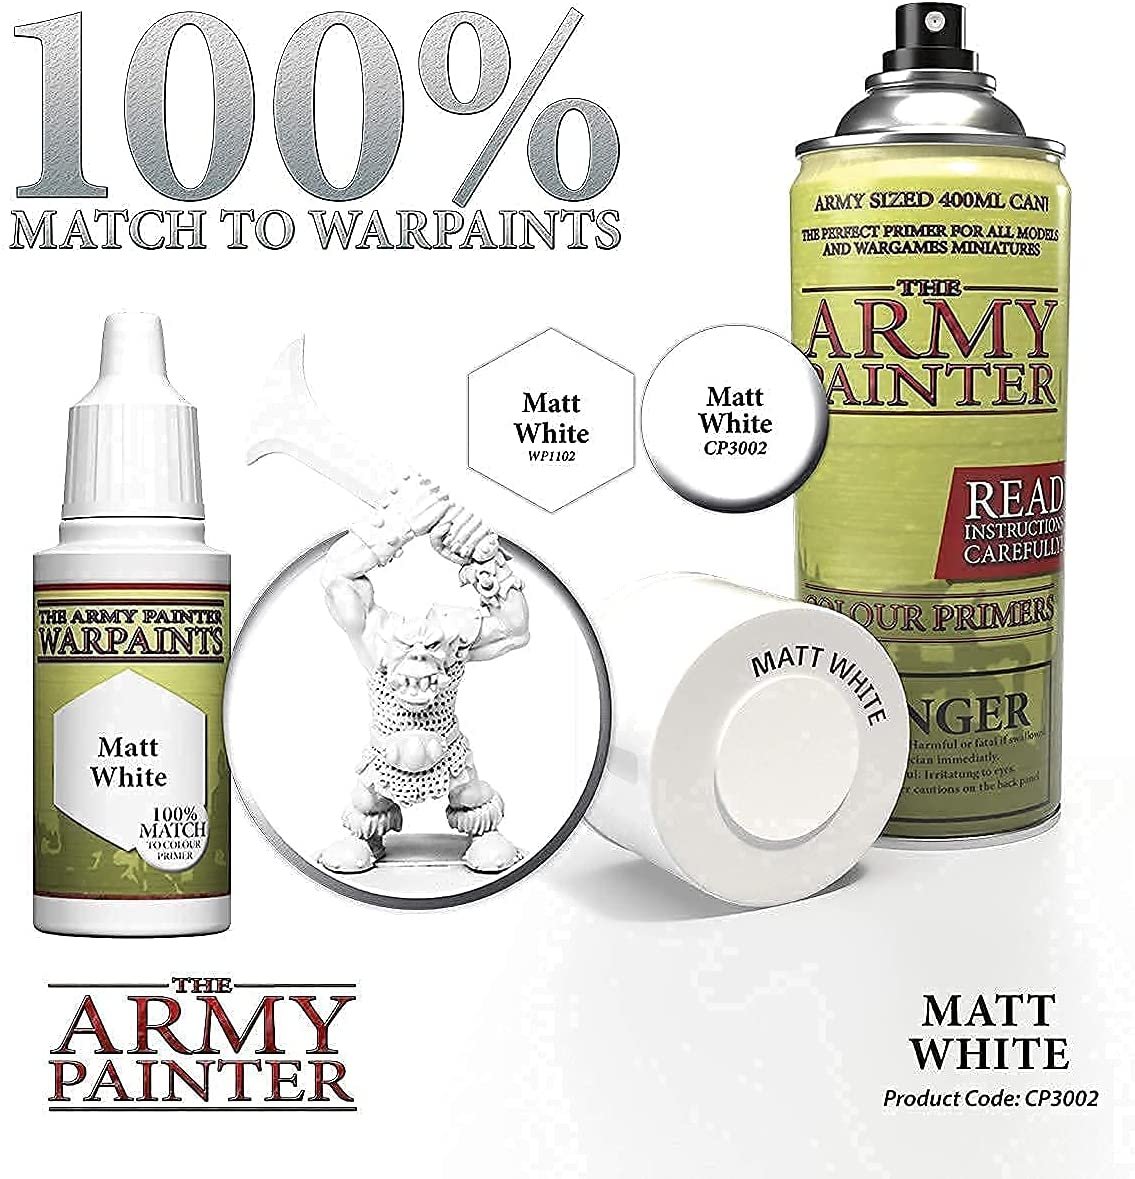 Army Painter Primers 